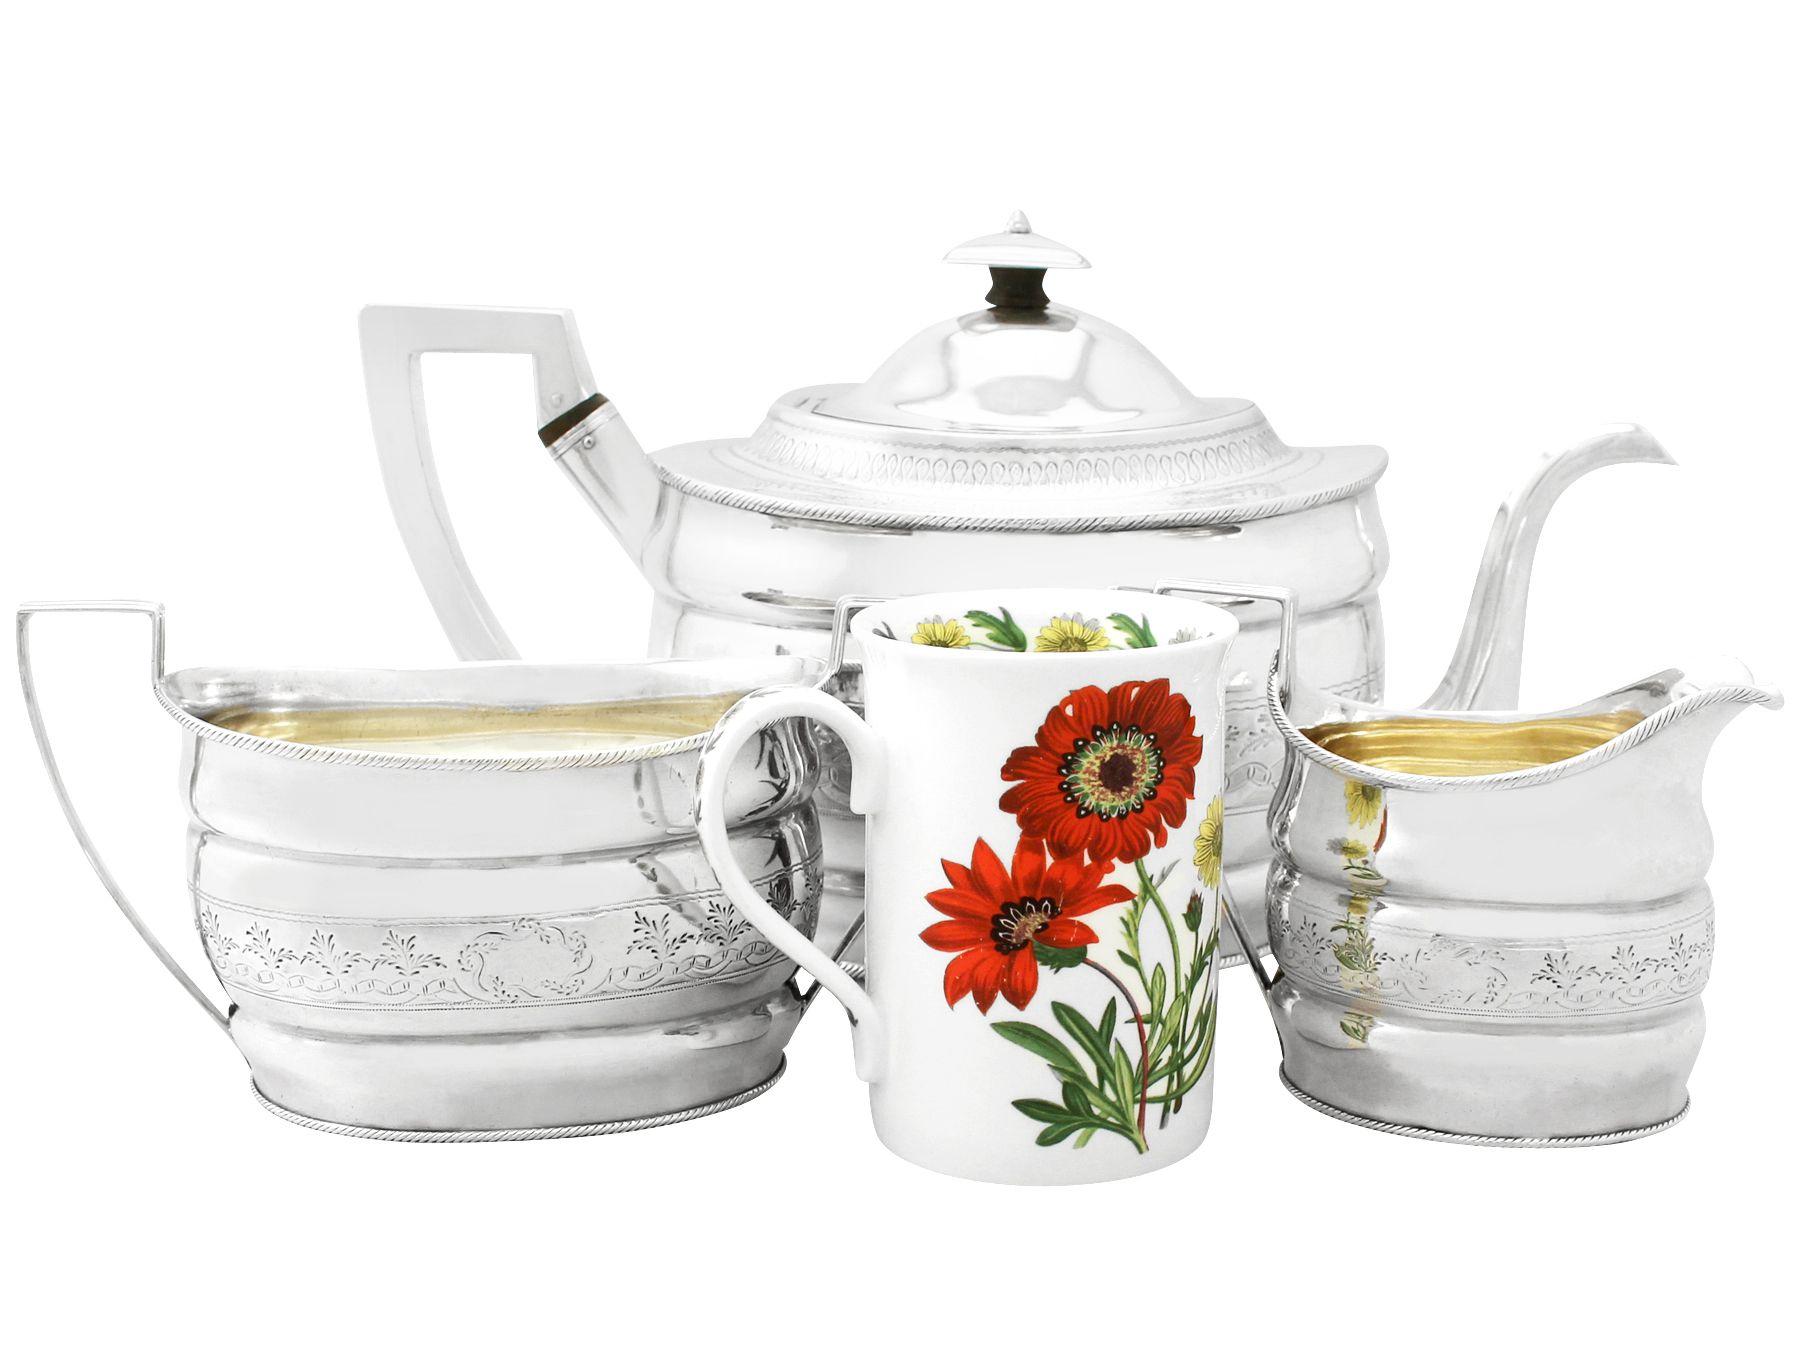 A fine and impressive, large antique Georgian English sterling silver three-piece tea service/set; part of our silver teaware collection.

This fine antique George III sterling silver three piece tea service consists of a teapot, cream jug and